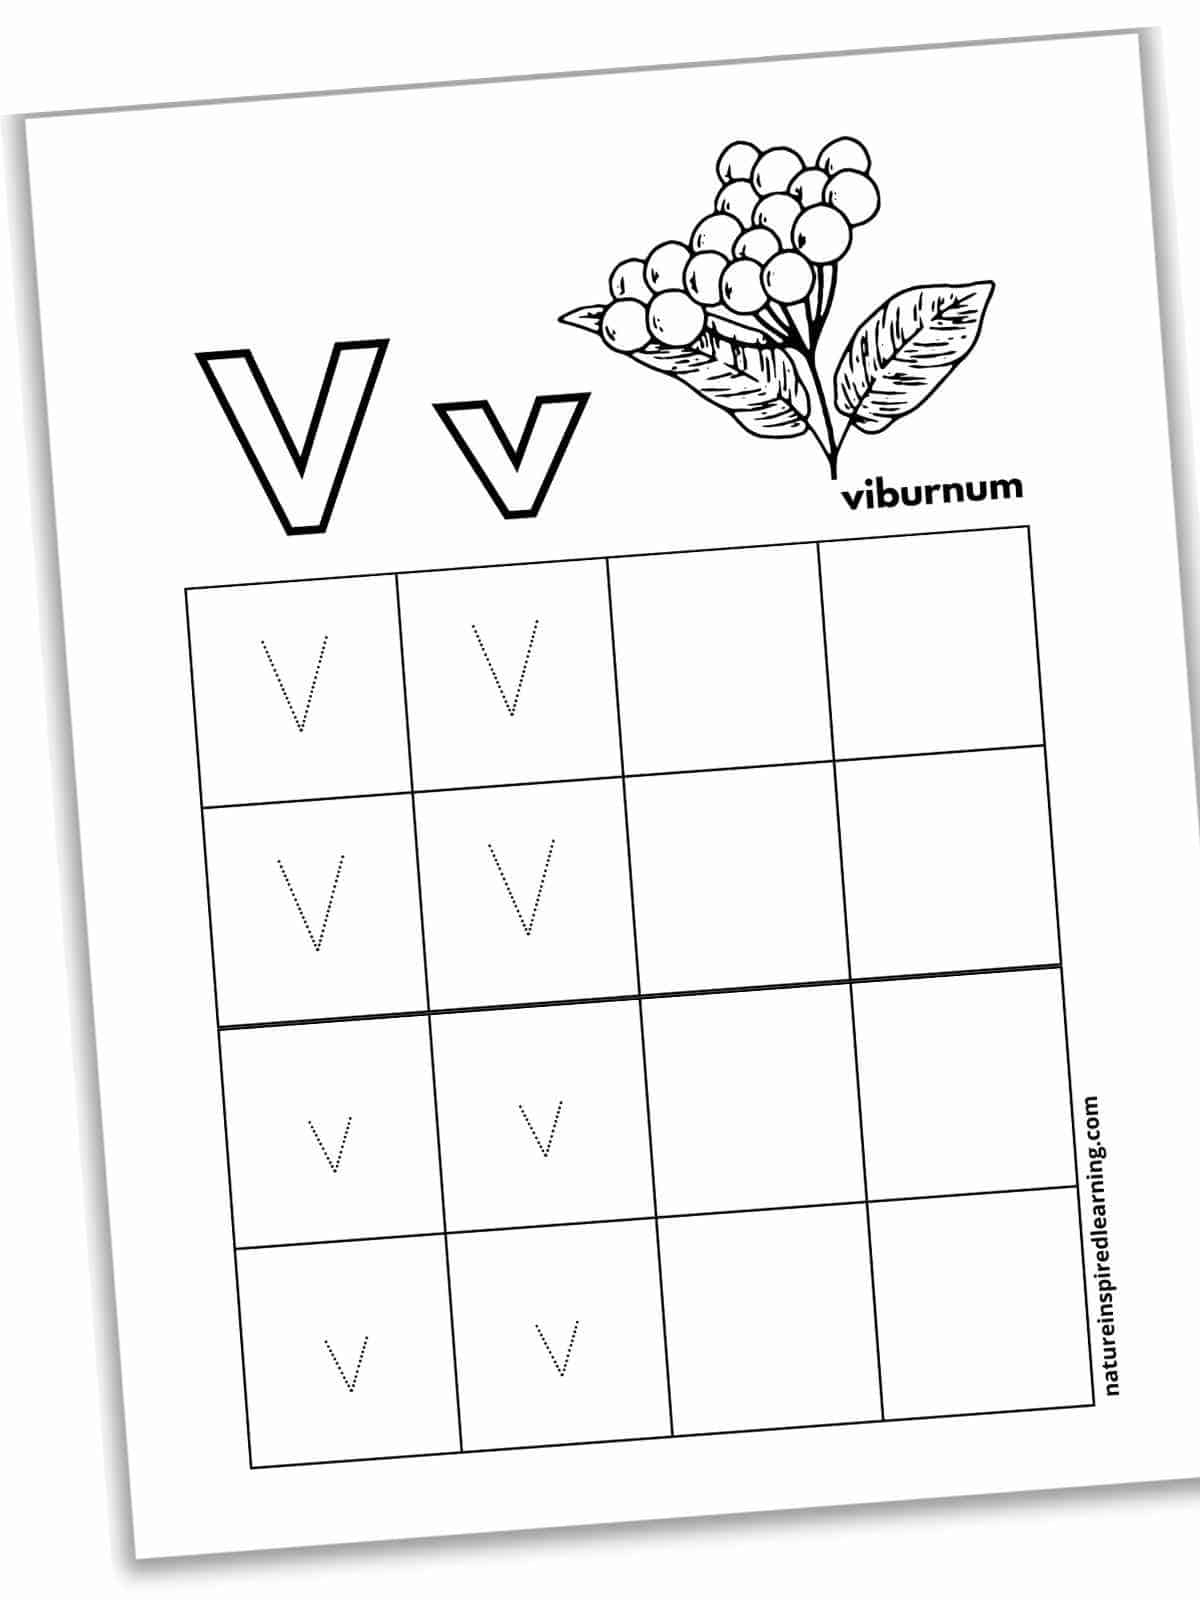 Worksheet with black and white viburnum berries and leaves next to outline form of V and v with a large grid below with dotted letter v's and blank boxes